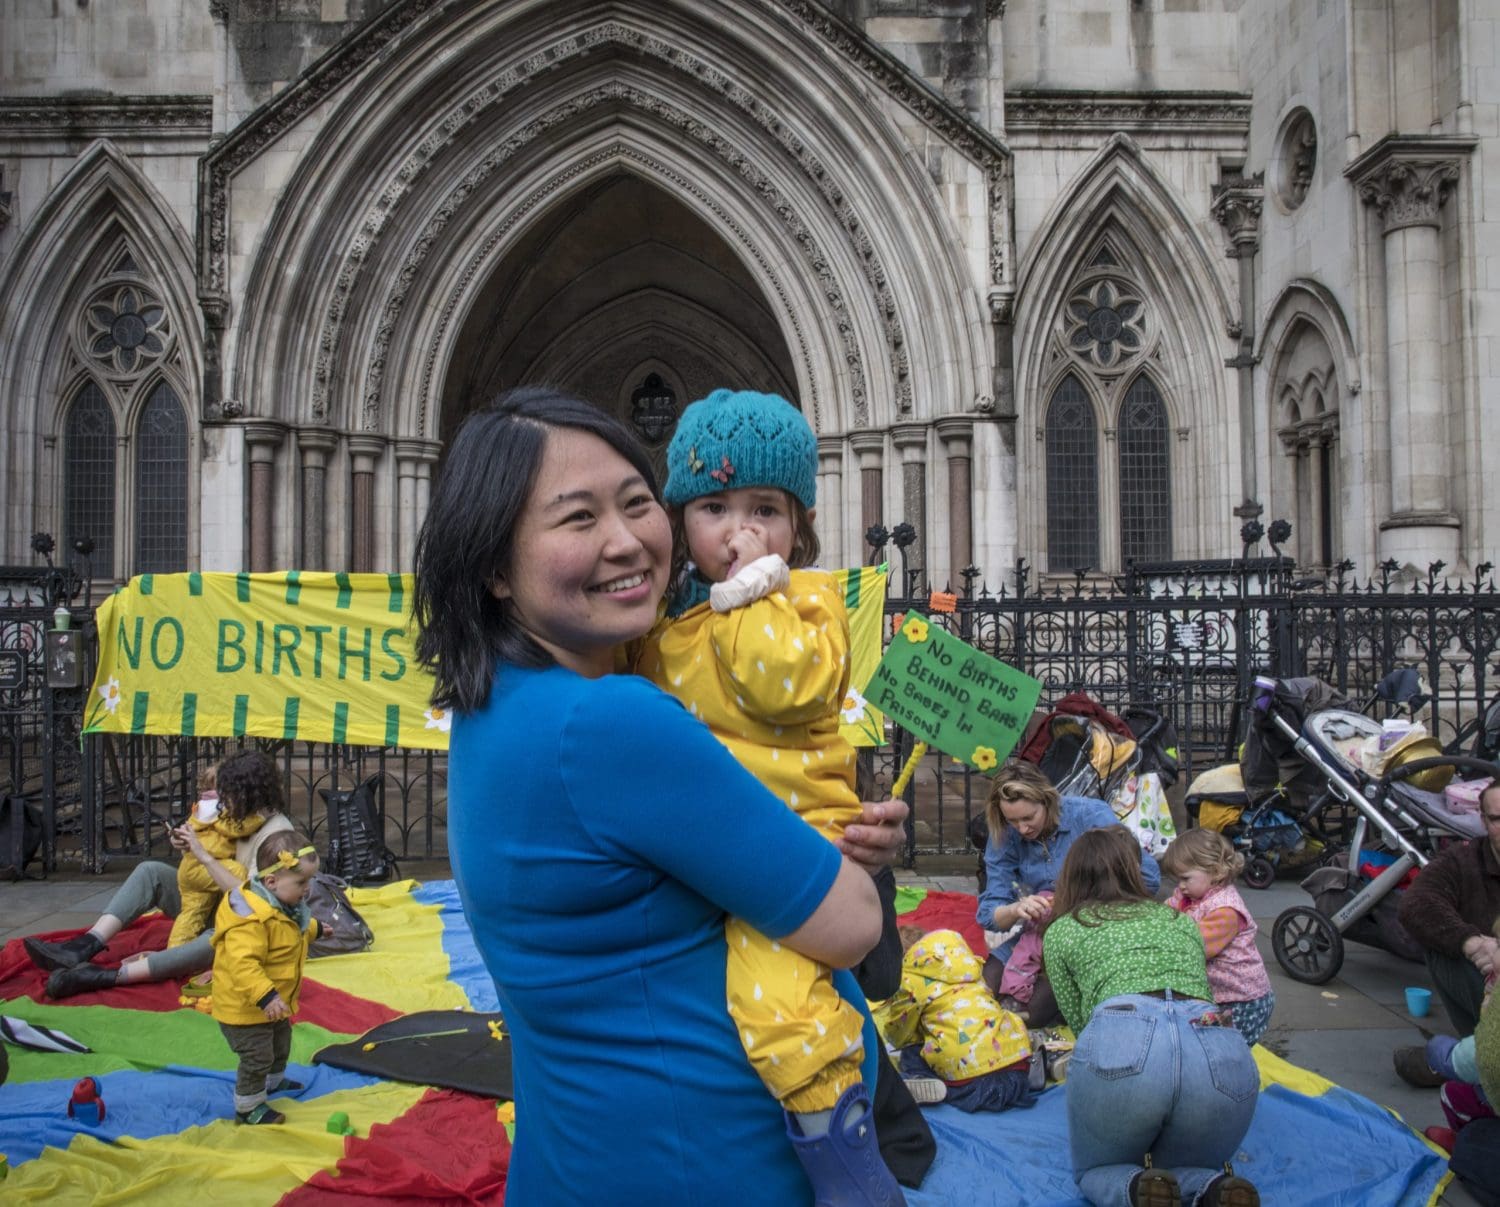 Babies, children and their parents rallied outside the Royal Courts of Justice in London to demand an end to the imprisonment of pregnant women, London, UK Saturday, March 18, 2023 The protest was organised by No Births Behind Bars and Level Up.